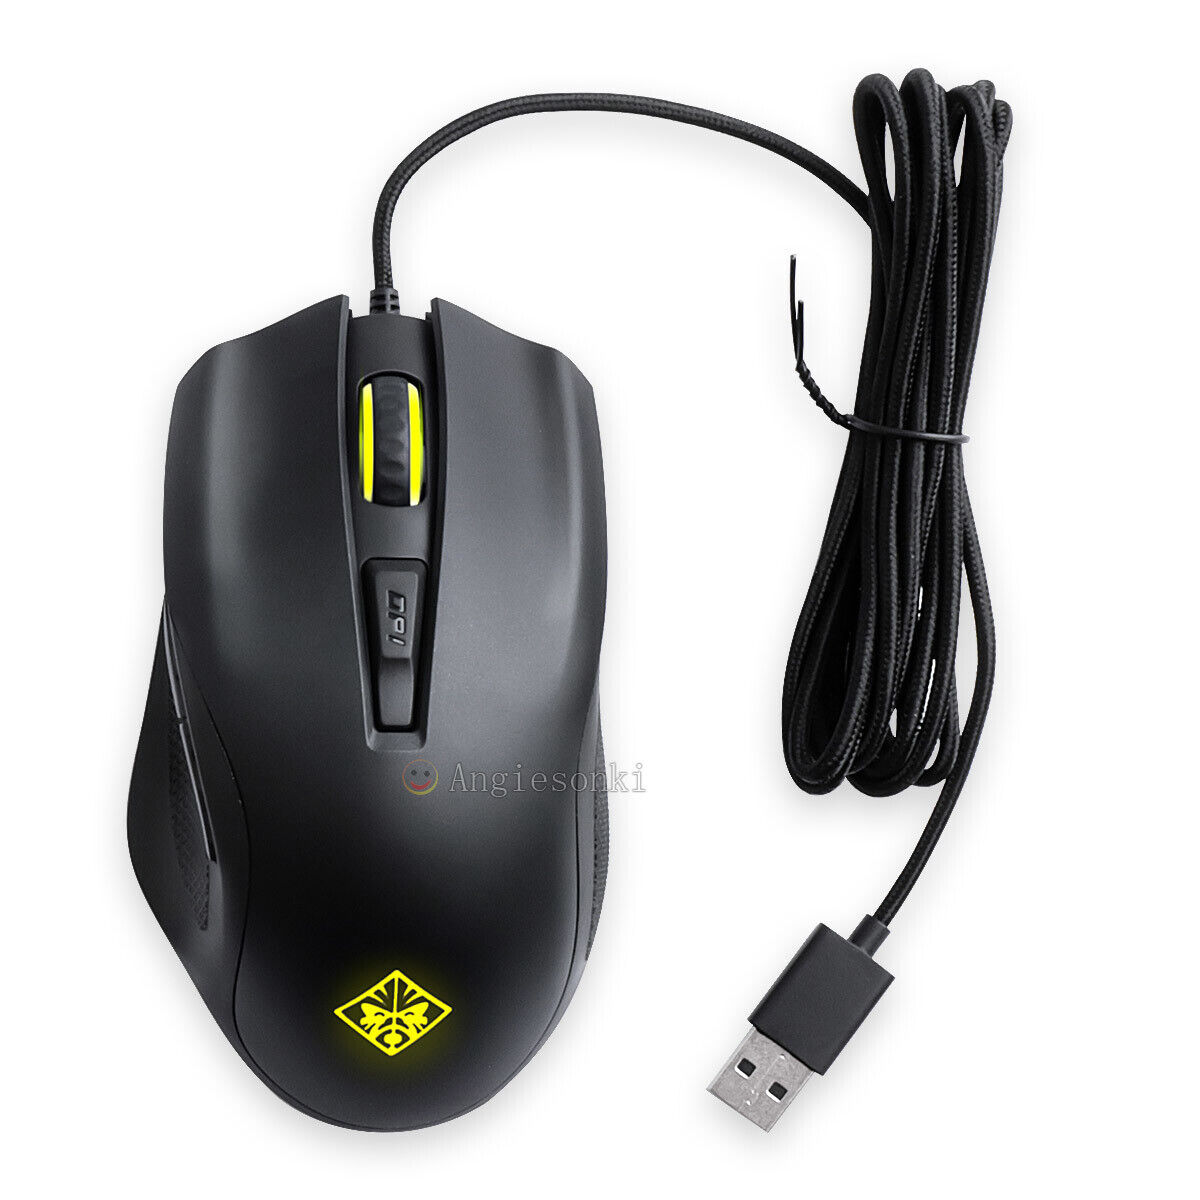  HP OMEN Adjustable Optical USB Wired Mouse for 600 12000 DPI 1KF75AA